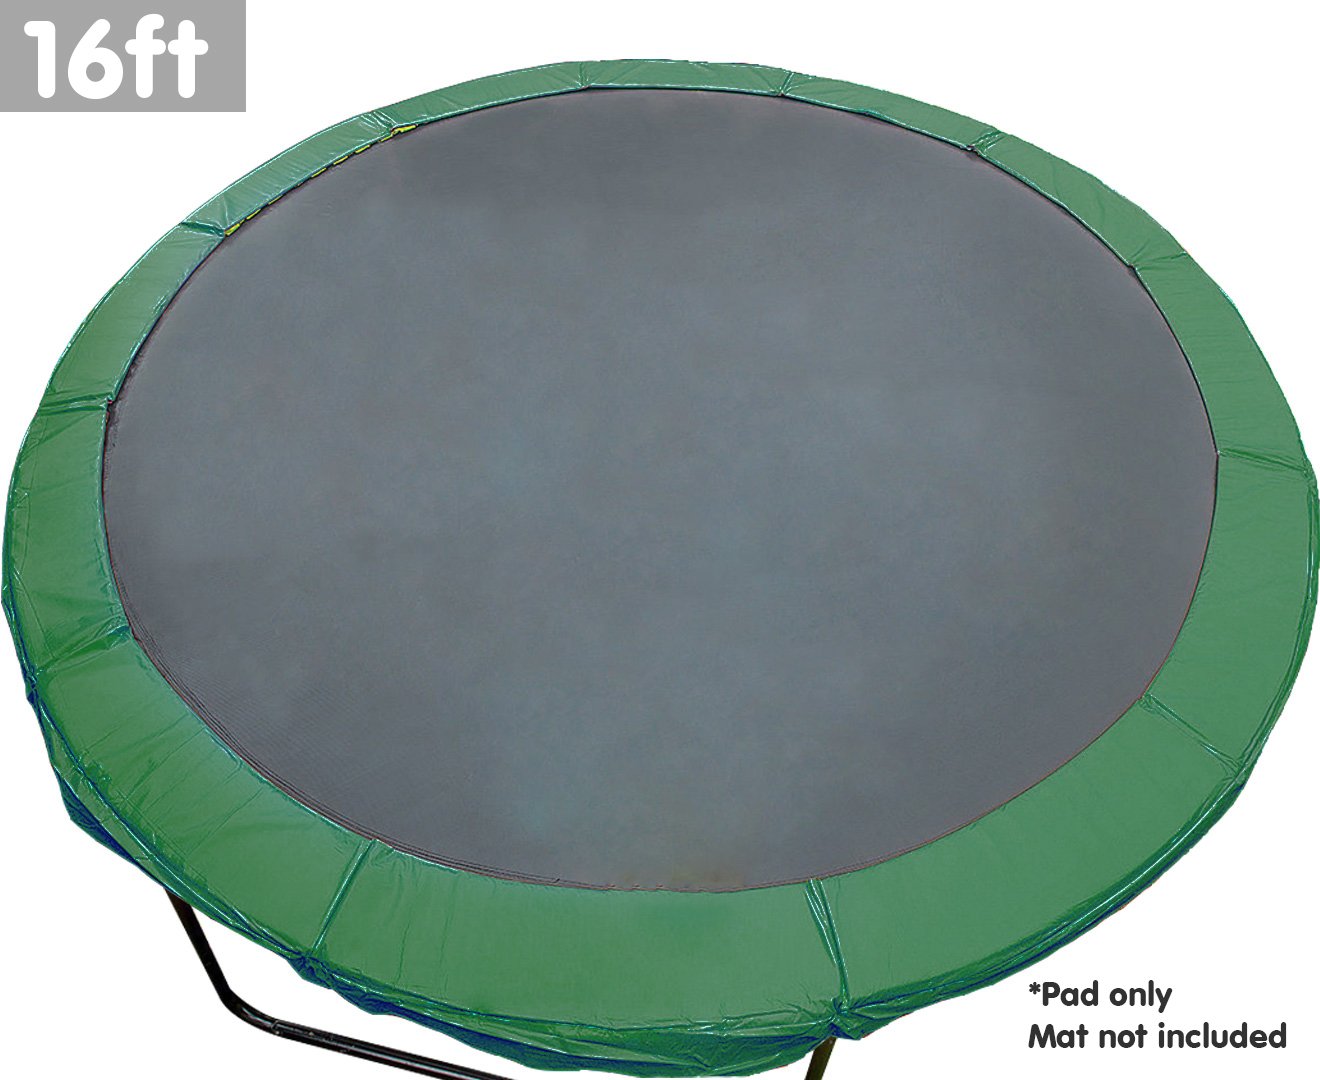 16ft Replacement Trampoline Outdoor Round Spring Pad Cover - Green 1